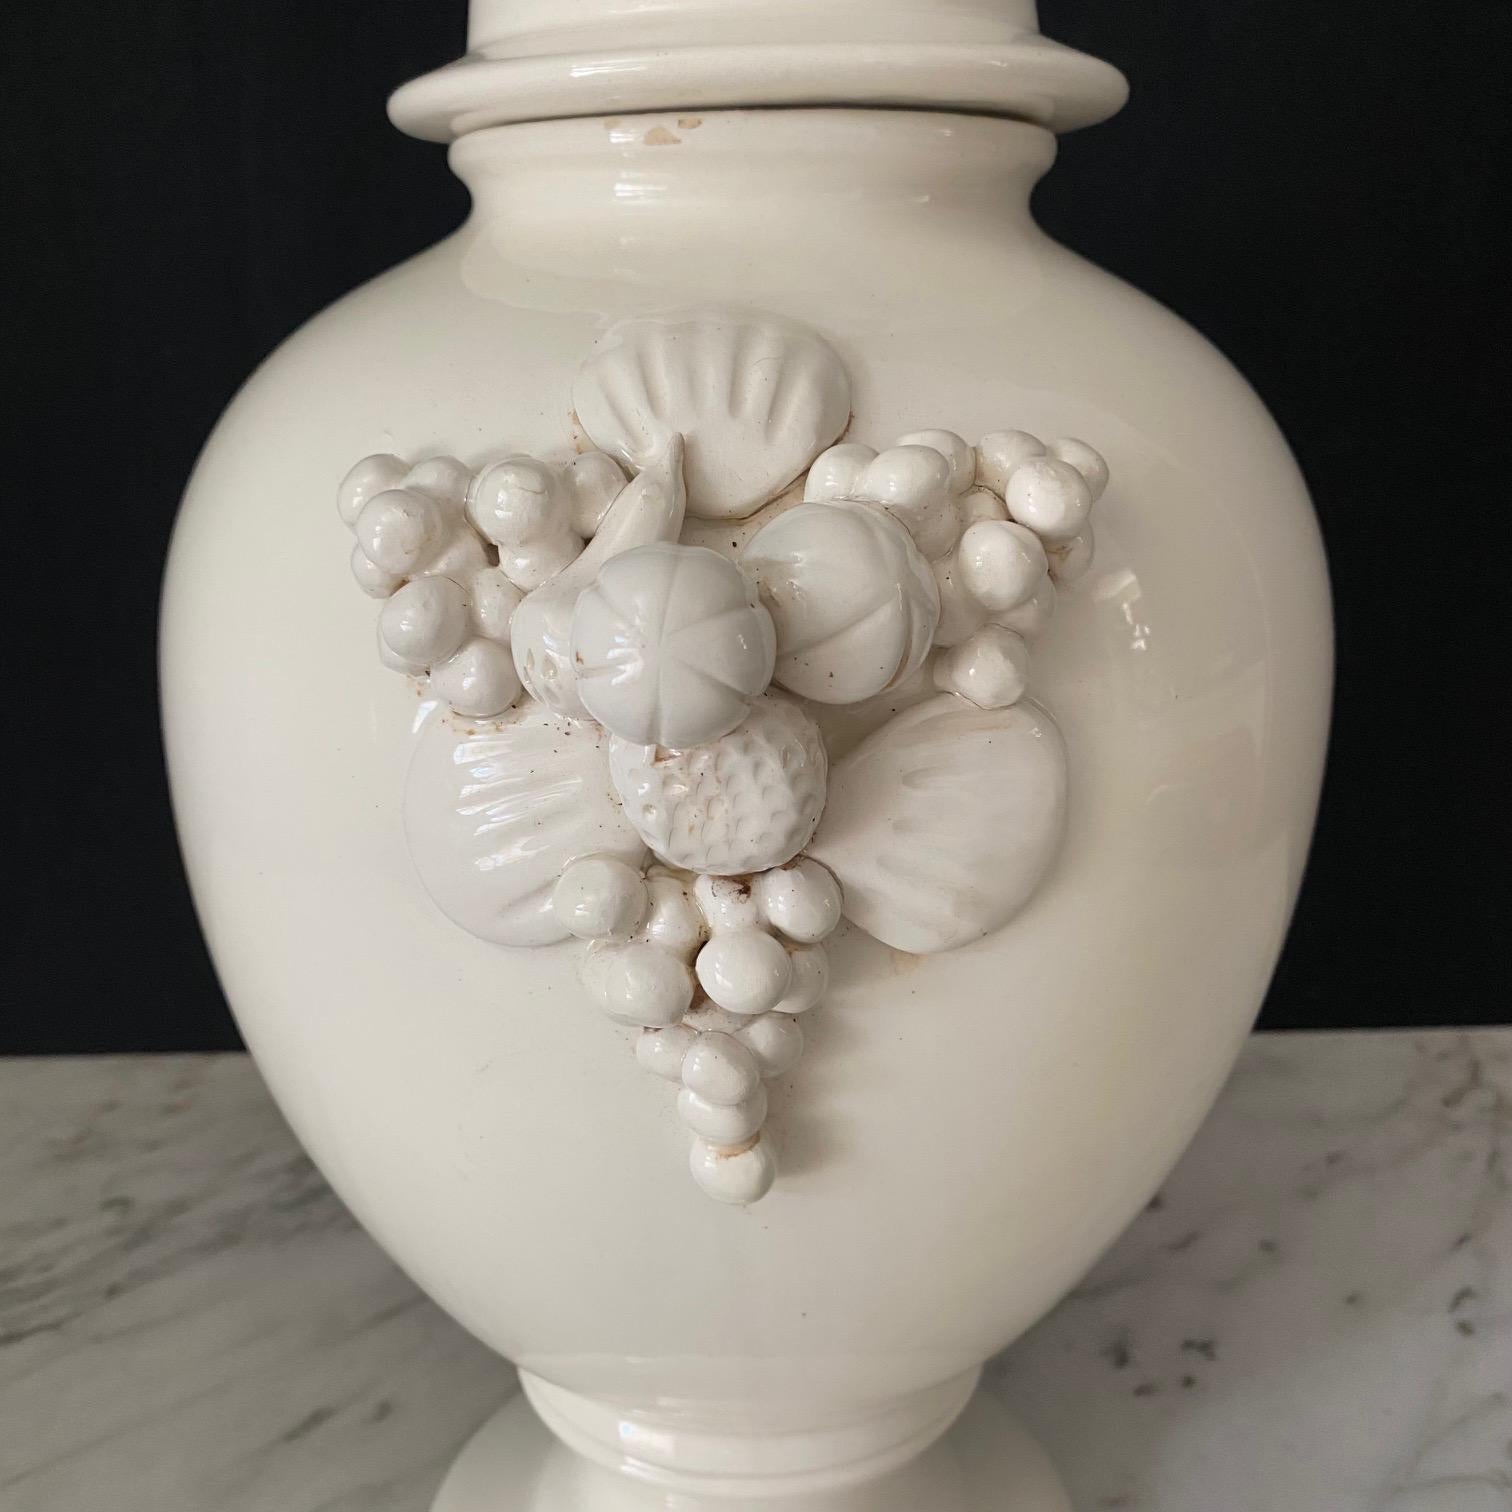 A pair of large Italian white ceramic urn vases with lovely round lids and fruit garlands on the sides. 7 point crown maker's mark on the bases; possibly Capodimente.   Elegant decoration for your home!
#7143